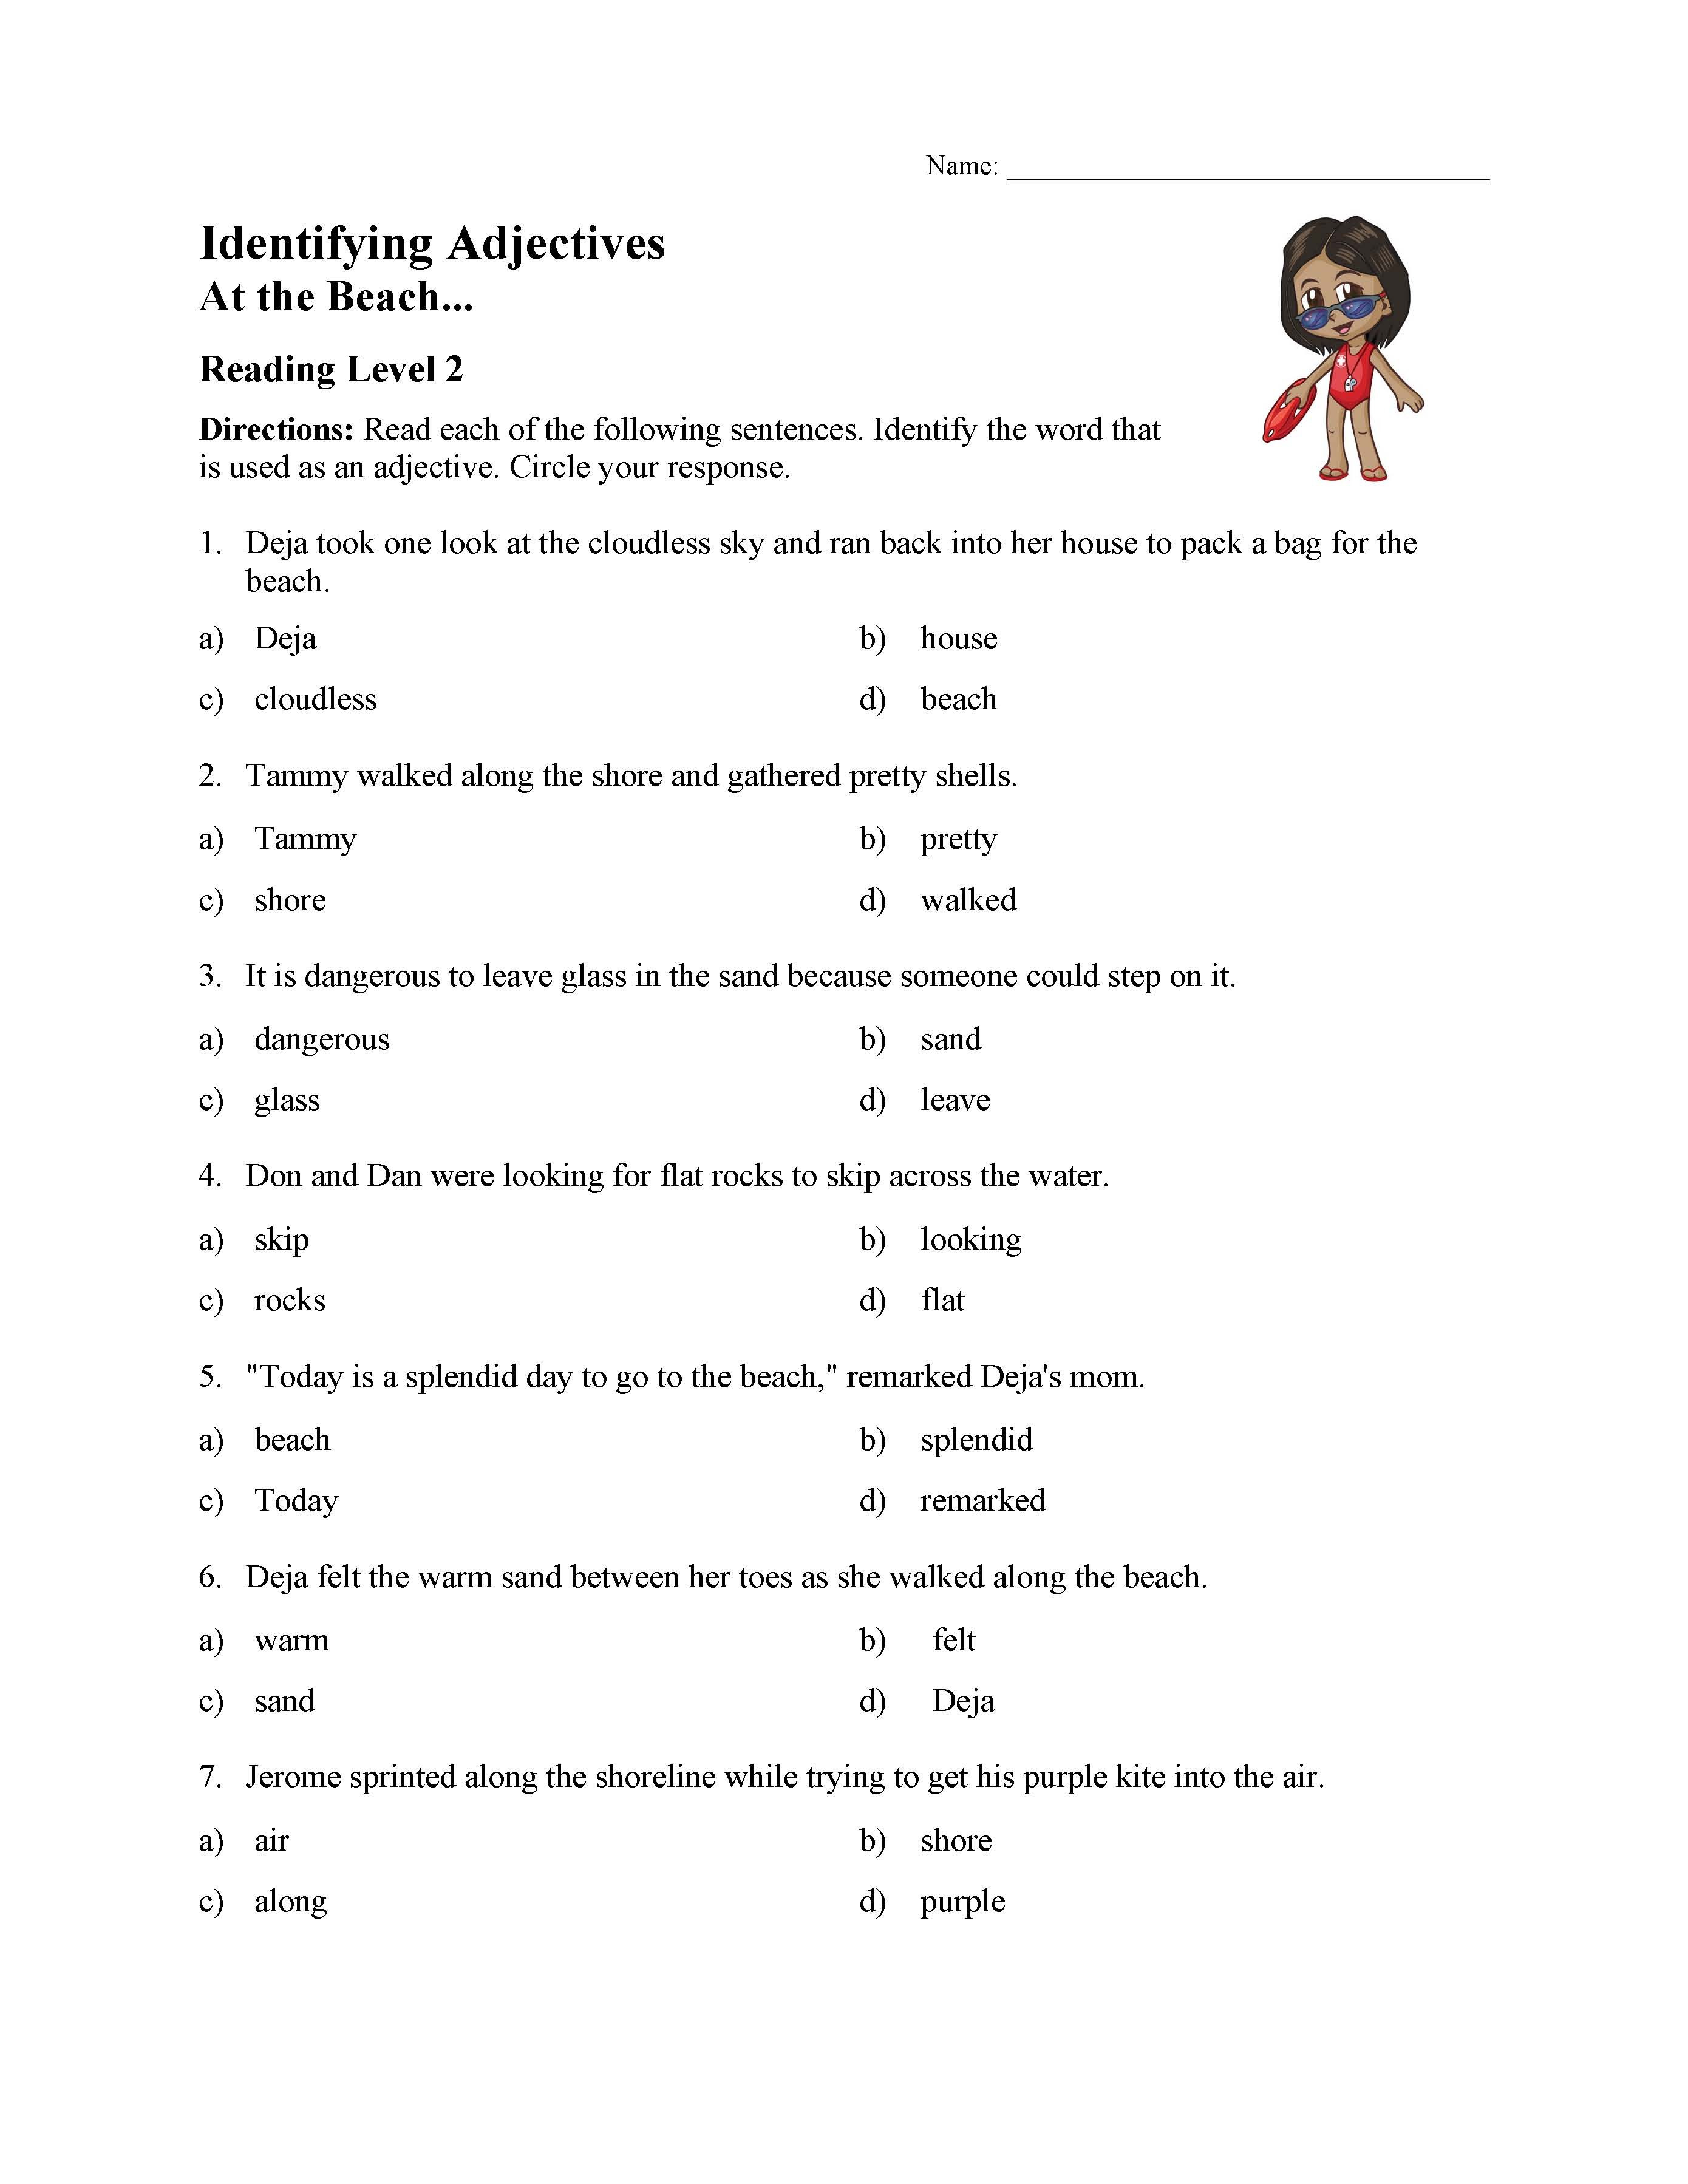 Identifying Adjectives Test 1  Reading Level 2  Preview